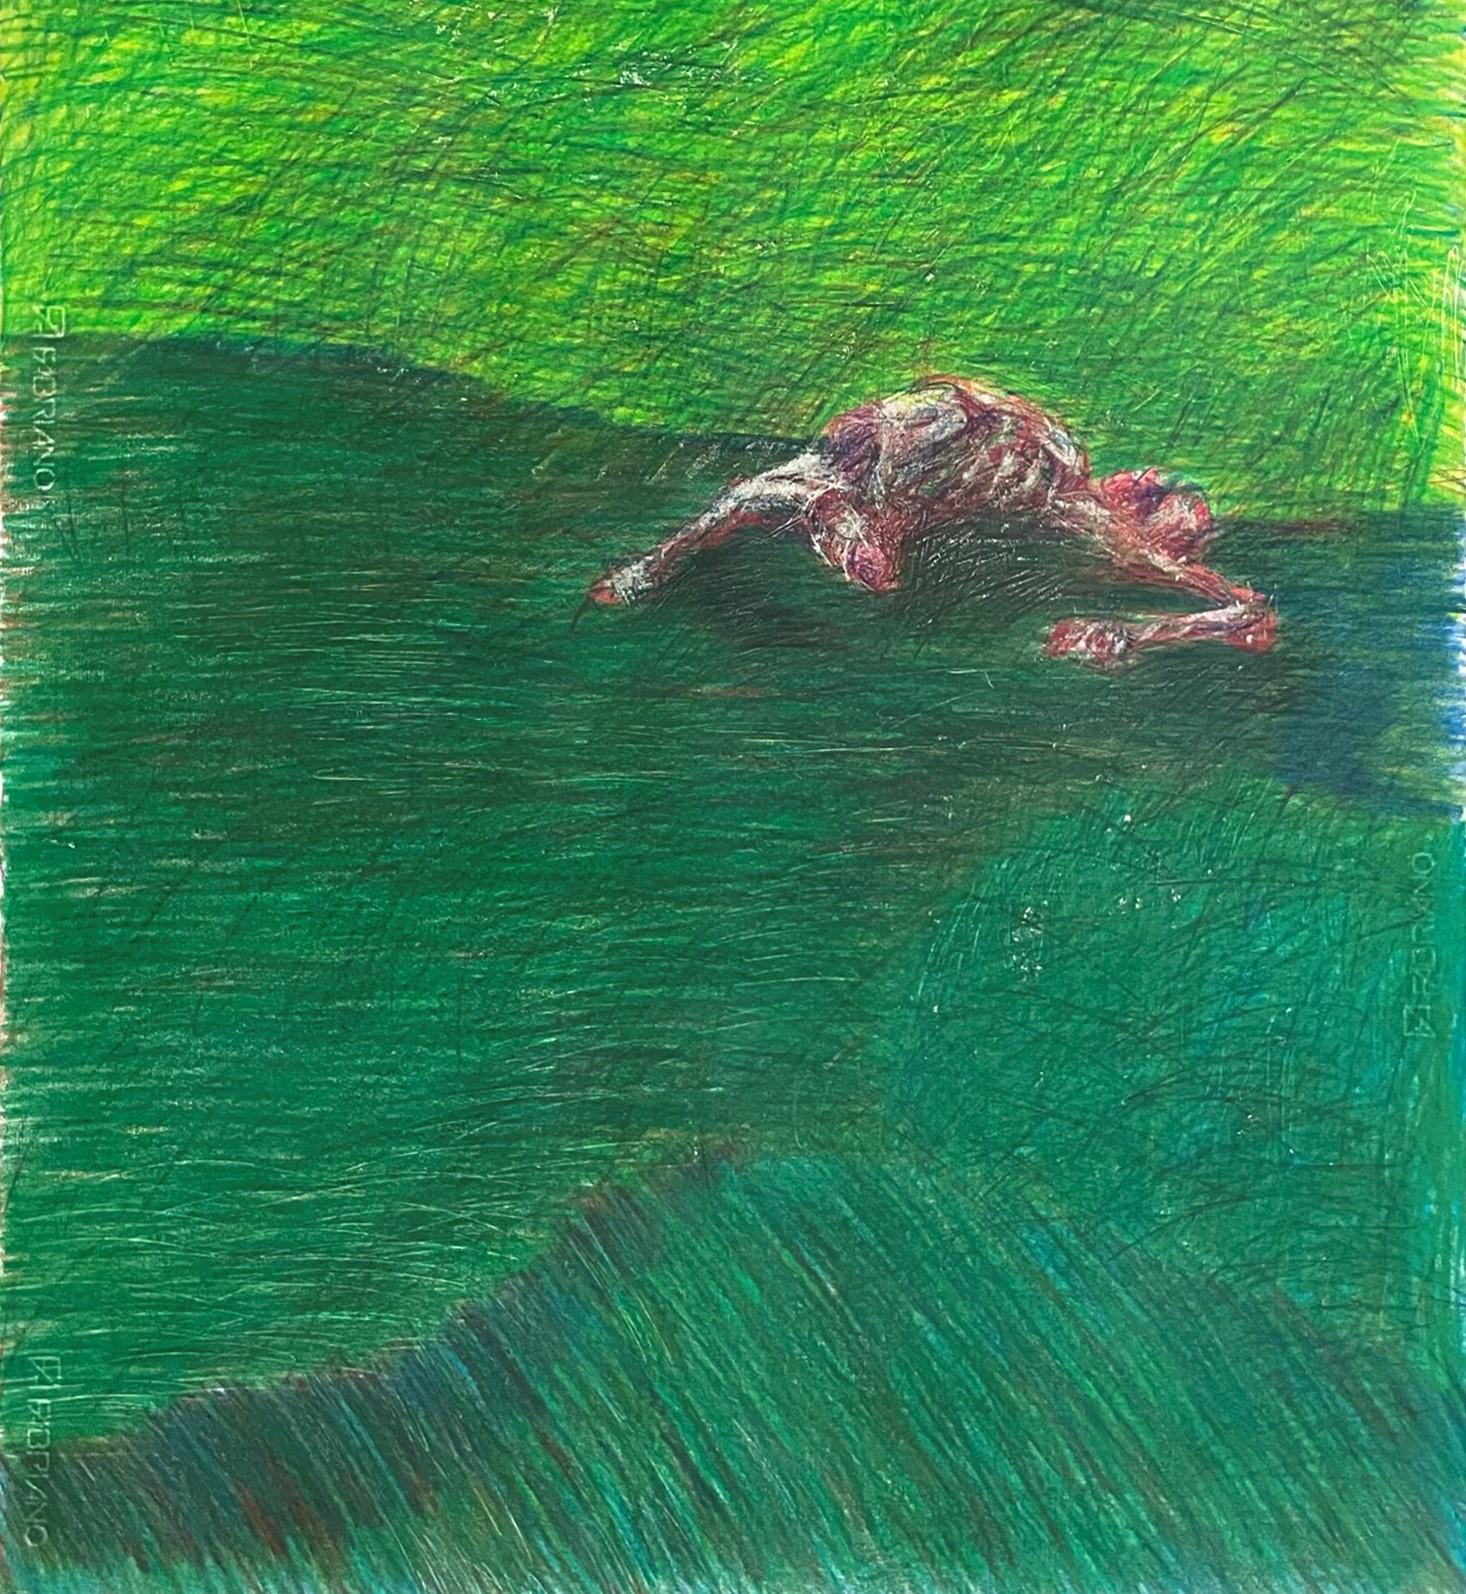 Untitled_Body on the Field #5, 2022
coloured pencils on paper
39 3/8 H x 27 9/16 W inches
100 H x 70 W cm
Signed on reverse

Zsolt Berszán embodies in his works the dissolution of the human body through the prism of the fragment, the body in pieces,